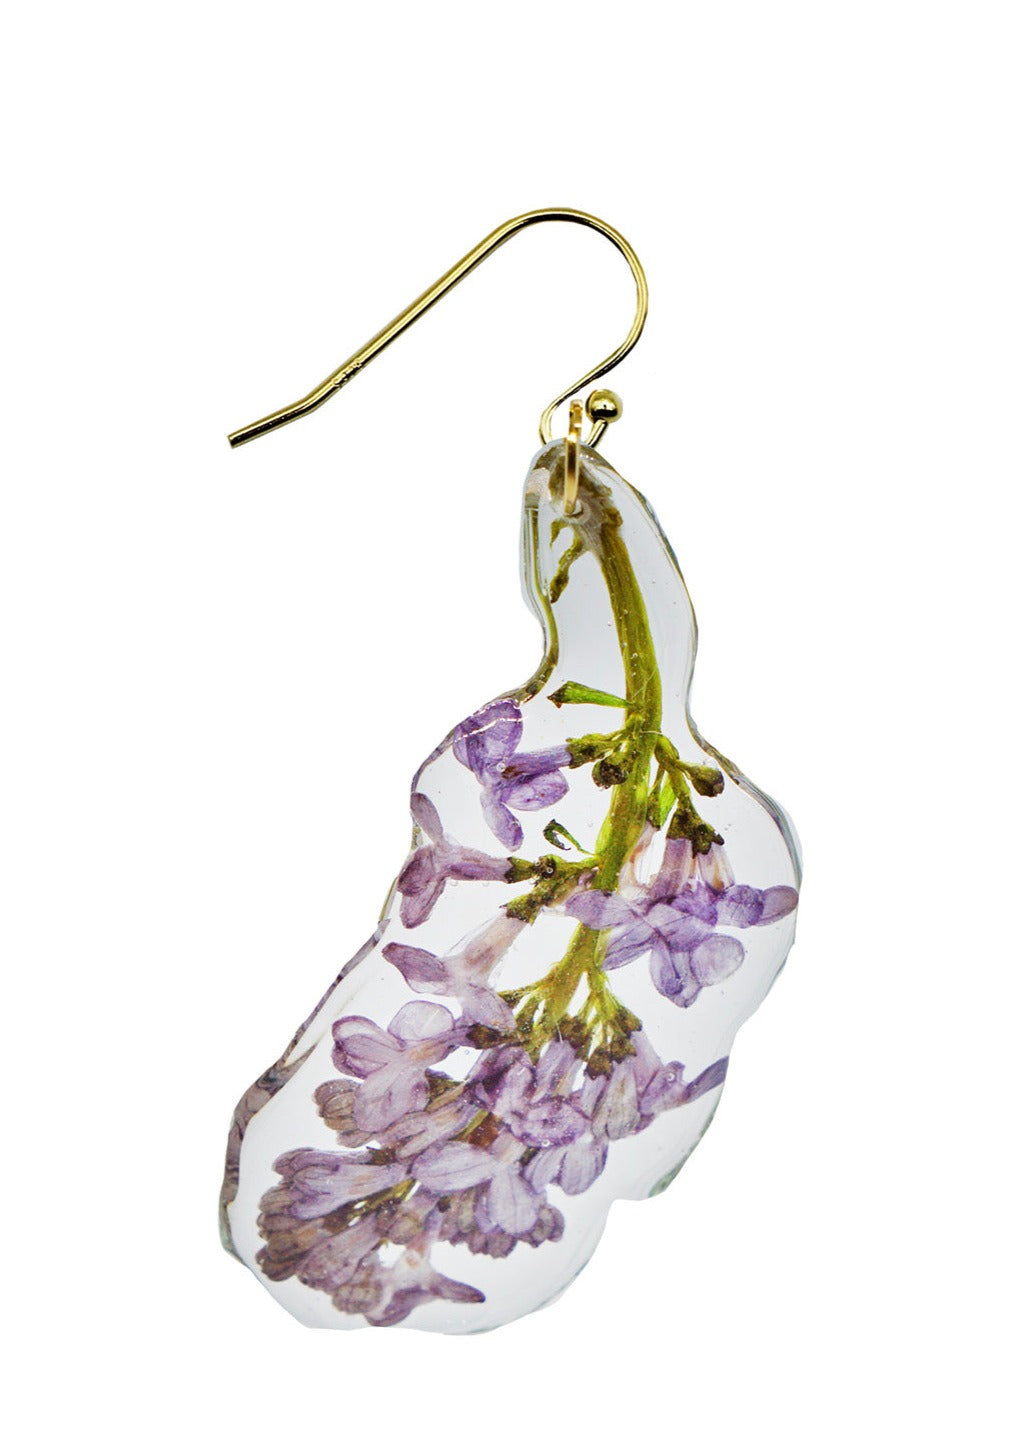 Resin Coated Purple Lilac Sprig with a green stem on a gold French hook earring